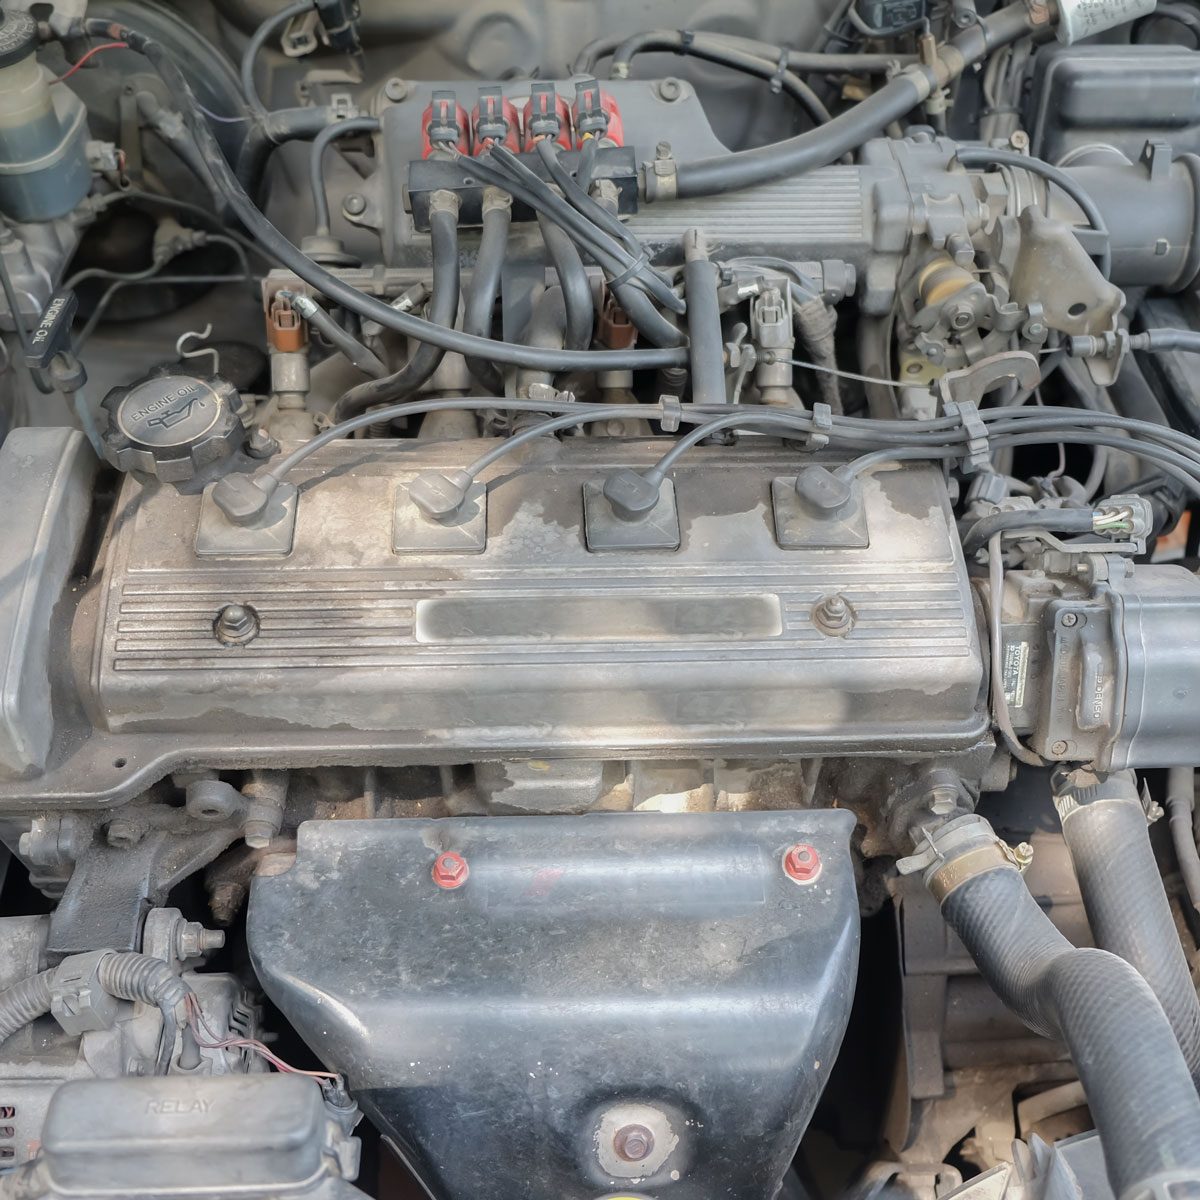 How To Clean Your Car's Engine Bay, And Keep It Clean